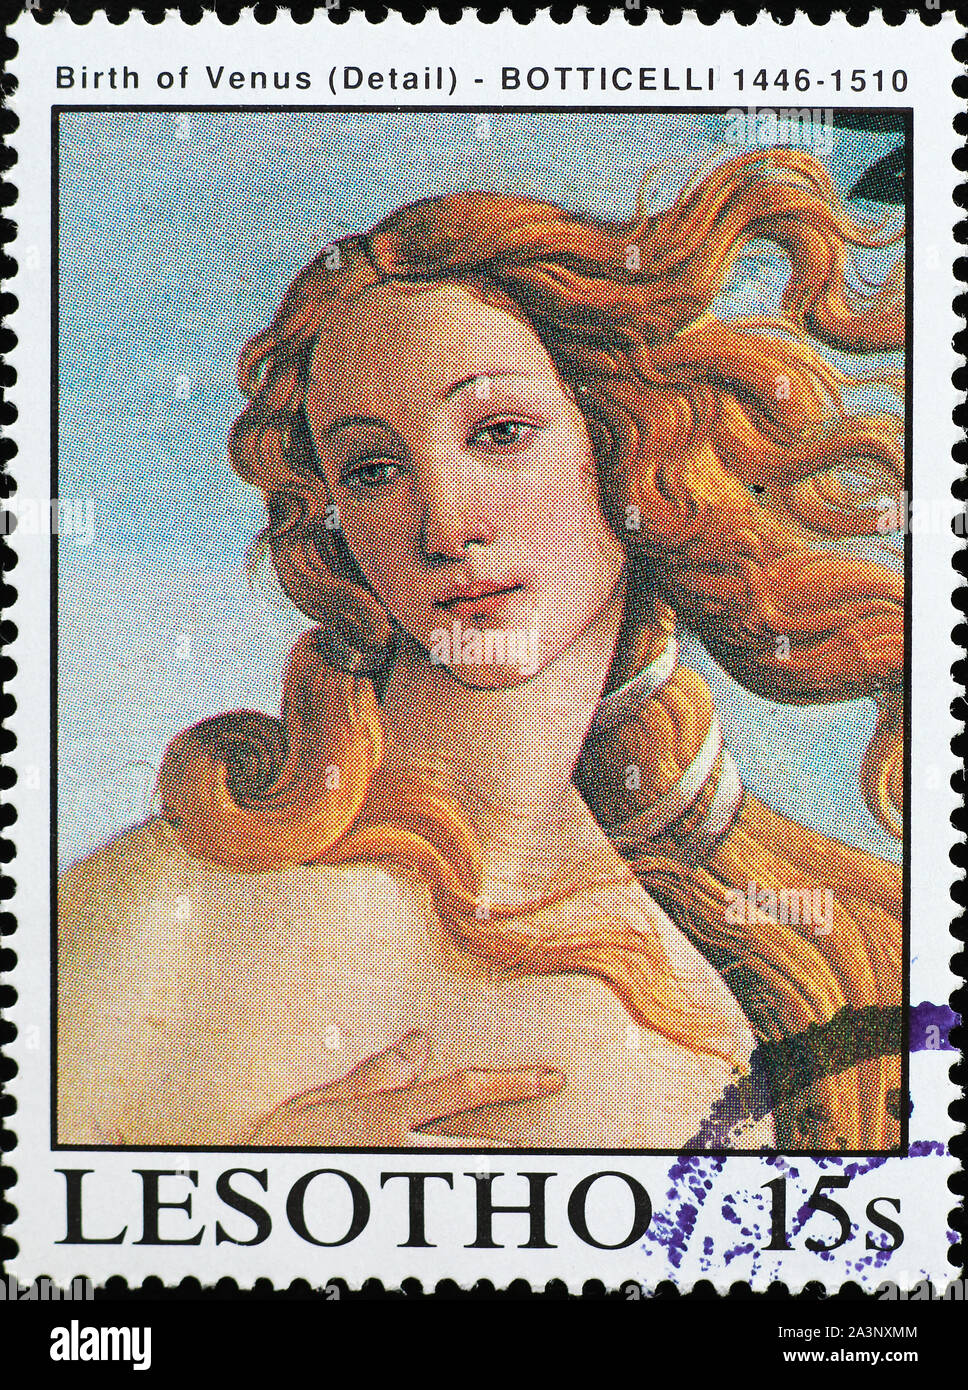 Venus painted by Botticelli on postage stamp Stock Photo